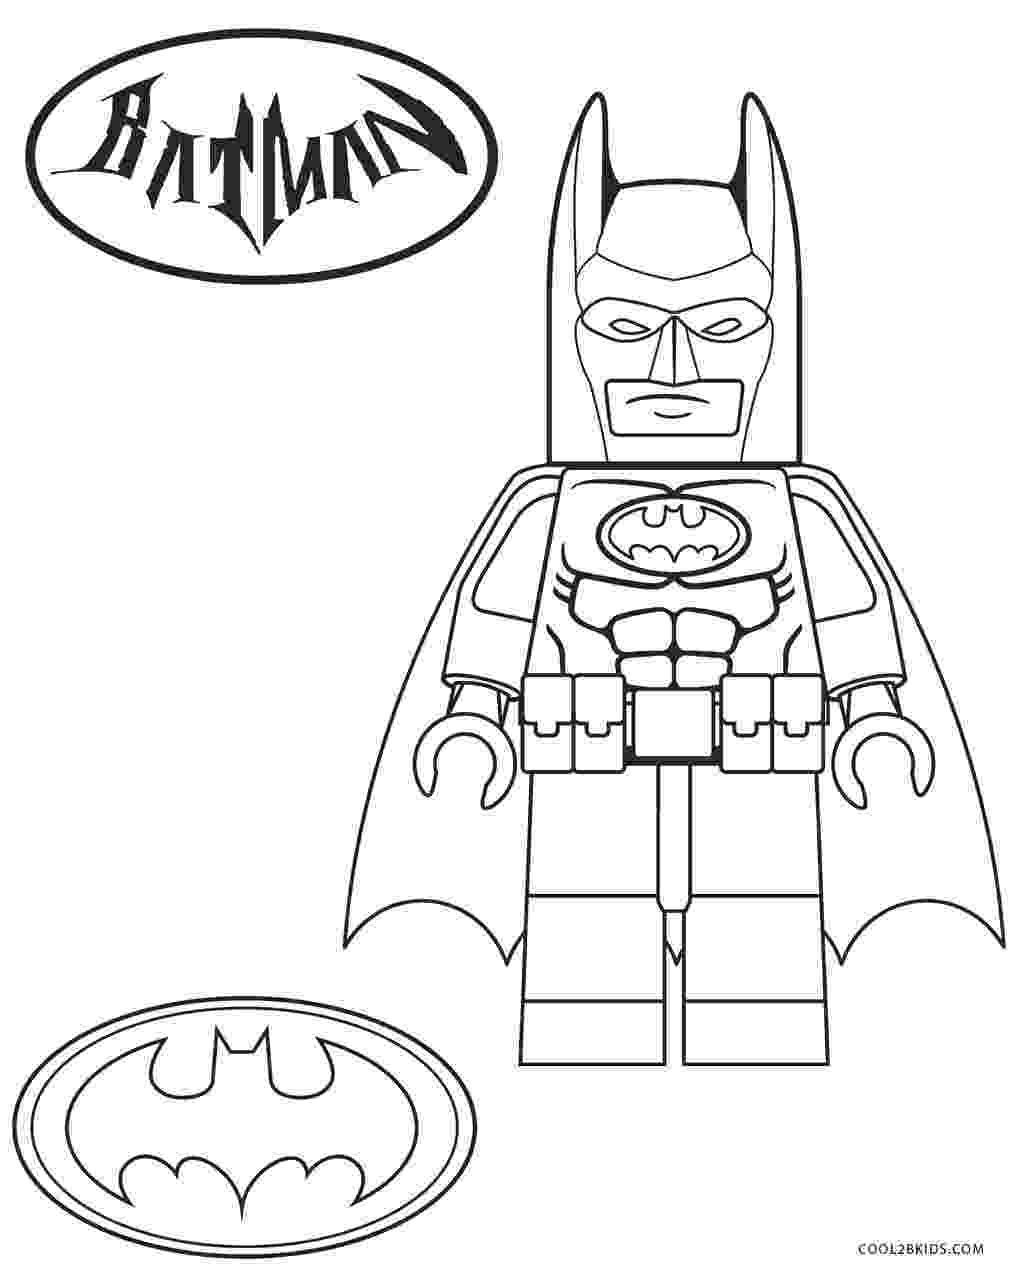 lego colouring sheet free printable lego coloring pages for kids cool2bkids lego colouring sheet 1 1